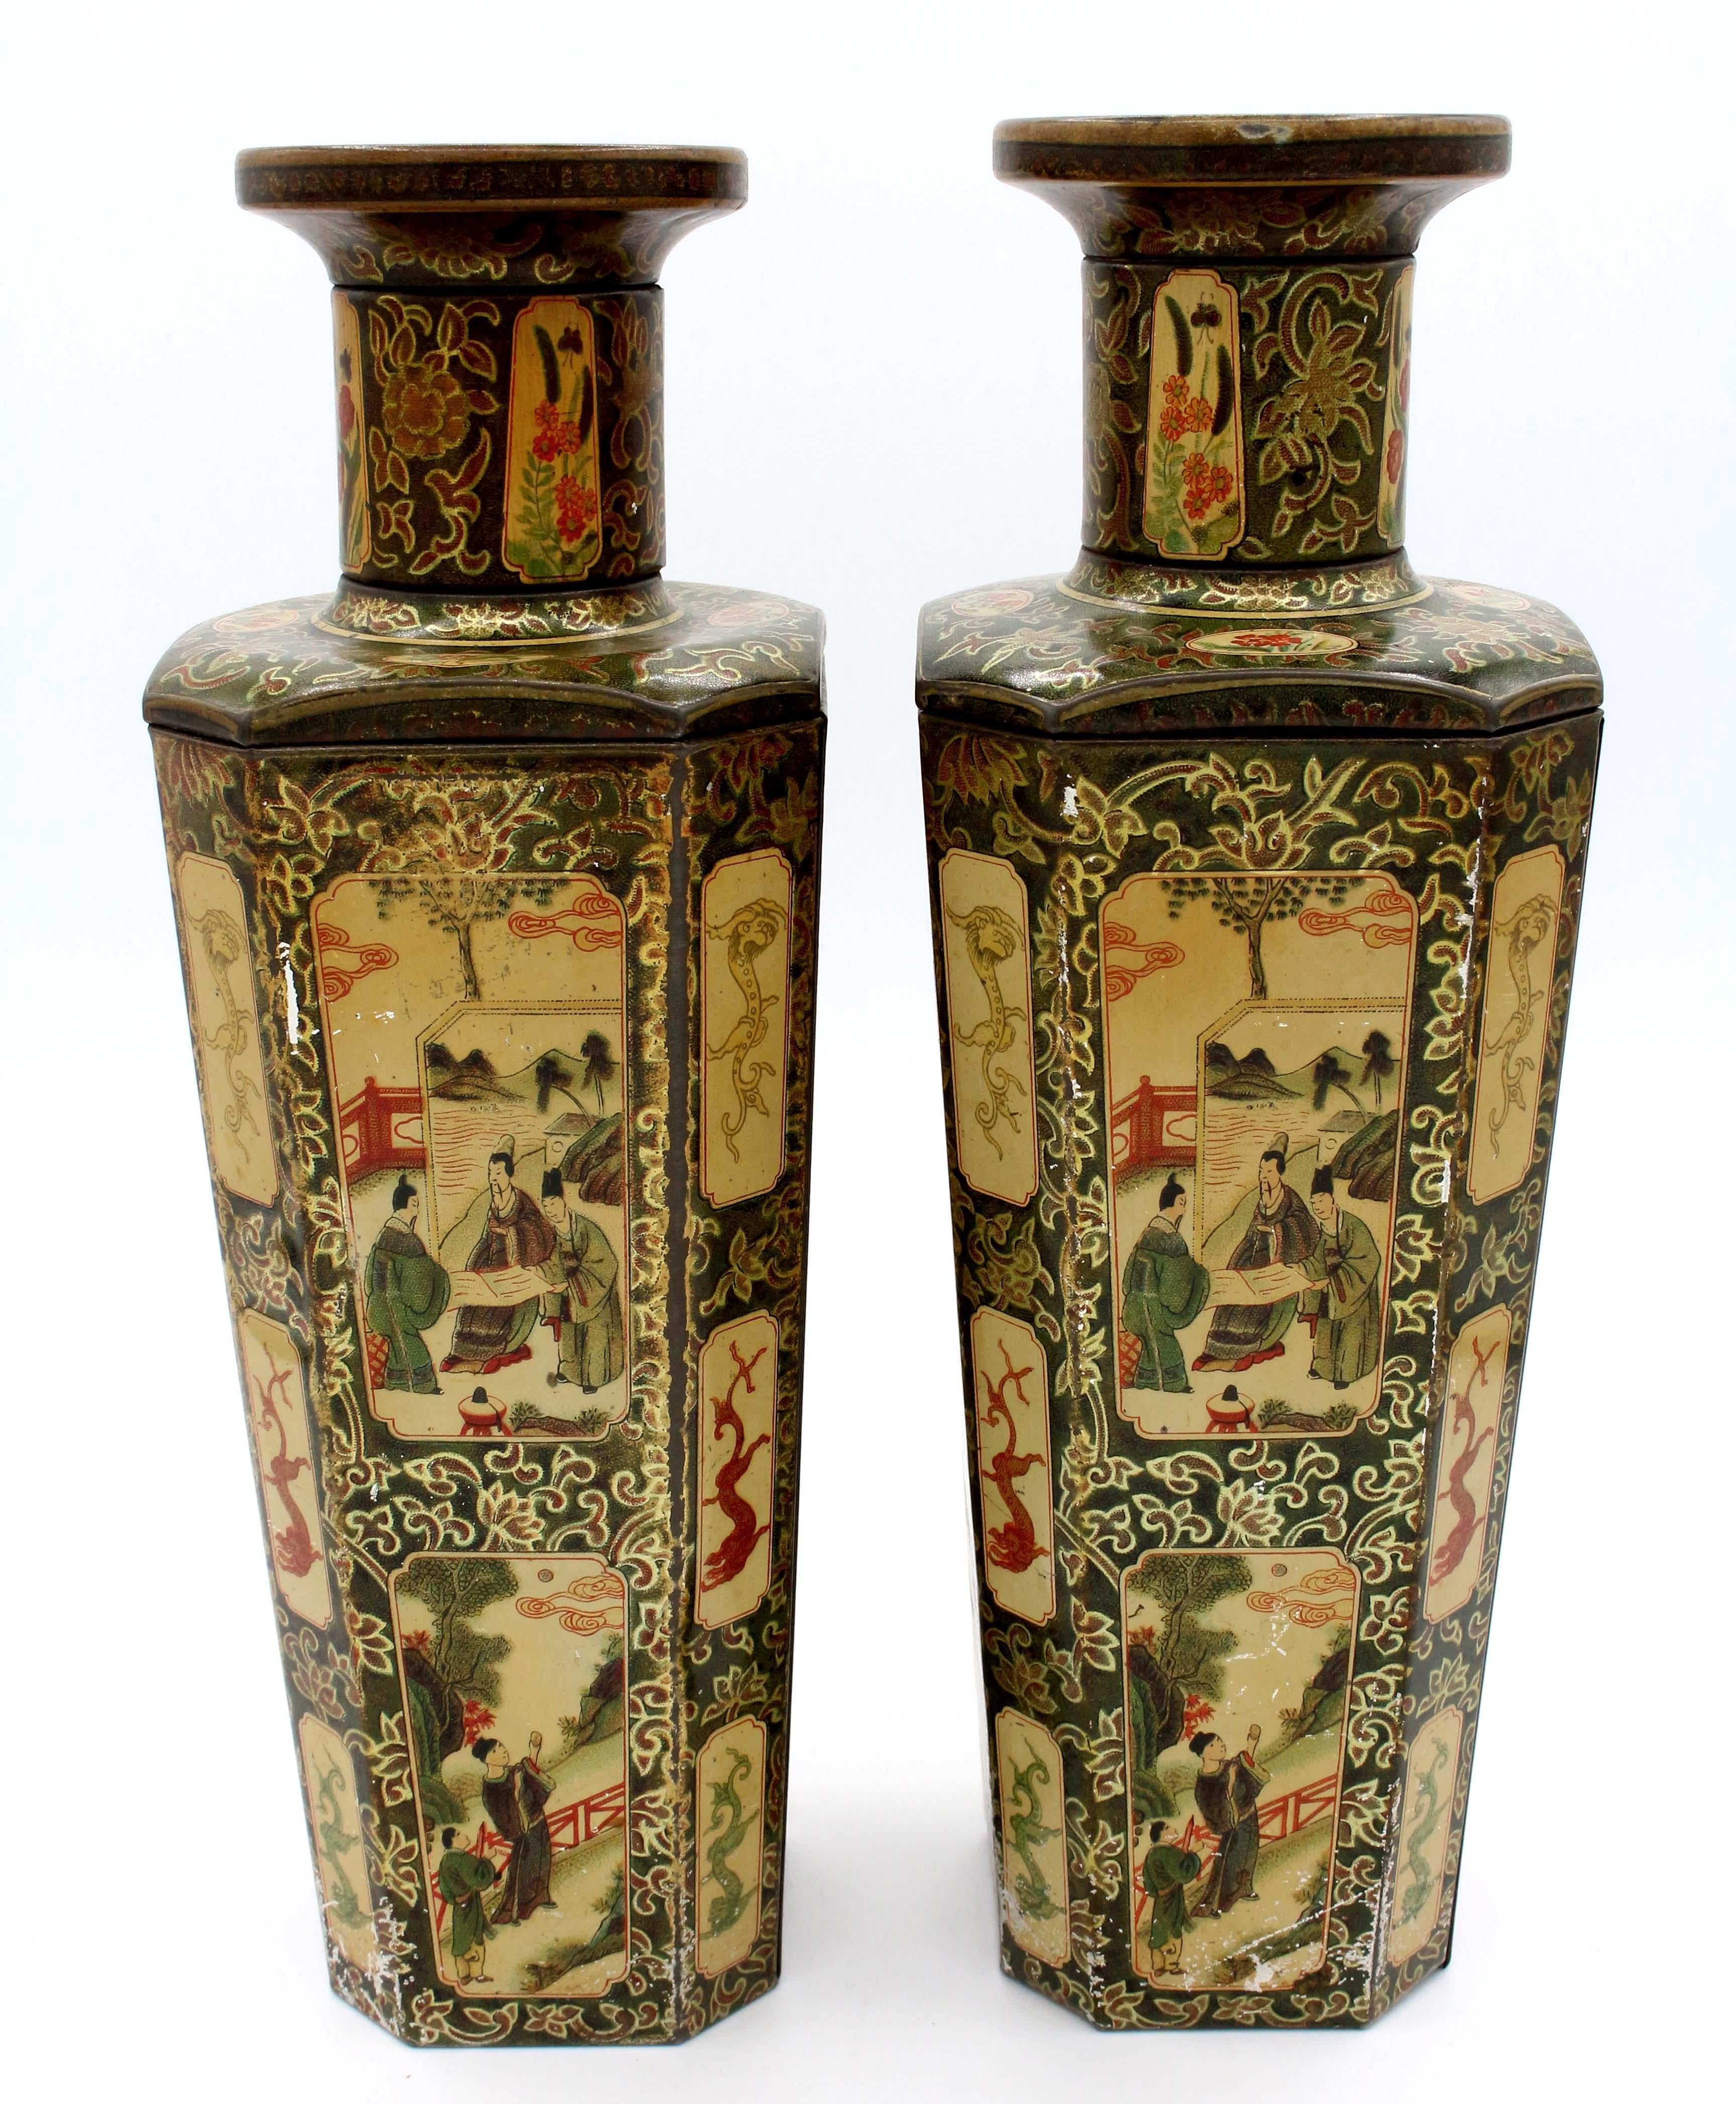 Art Deco Pair of Vase Form Biscuit Tin Boxes by Huntley & Palmers, 1928, English For Sale